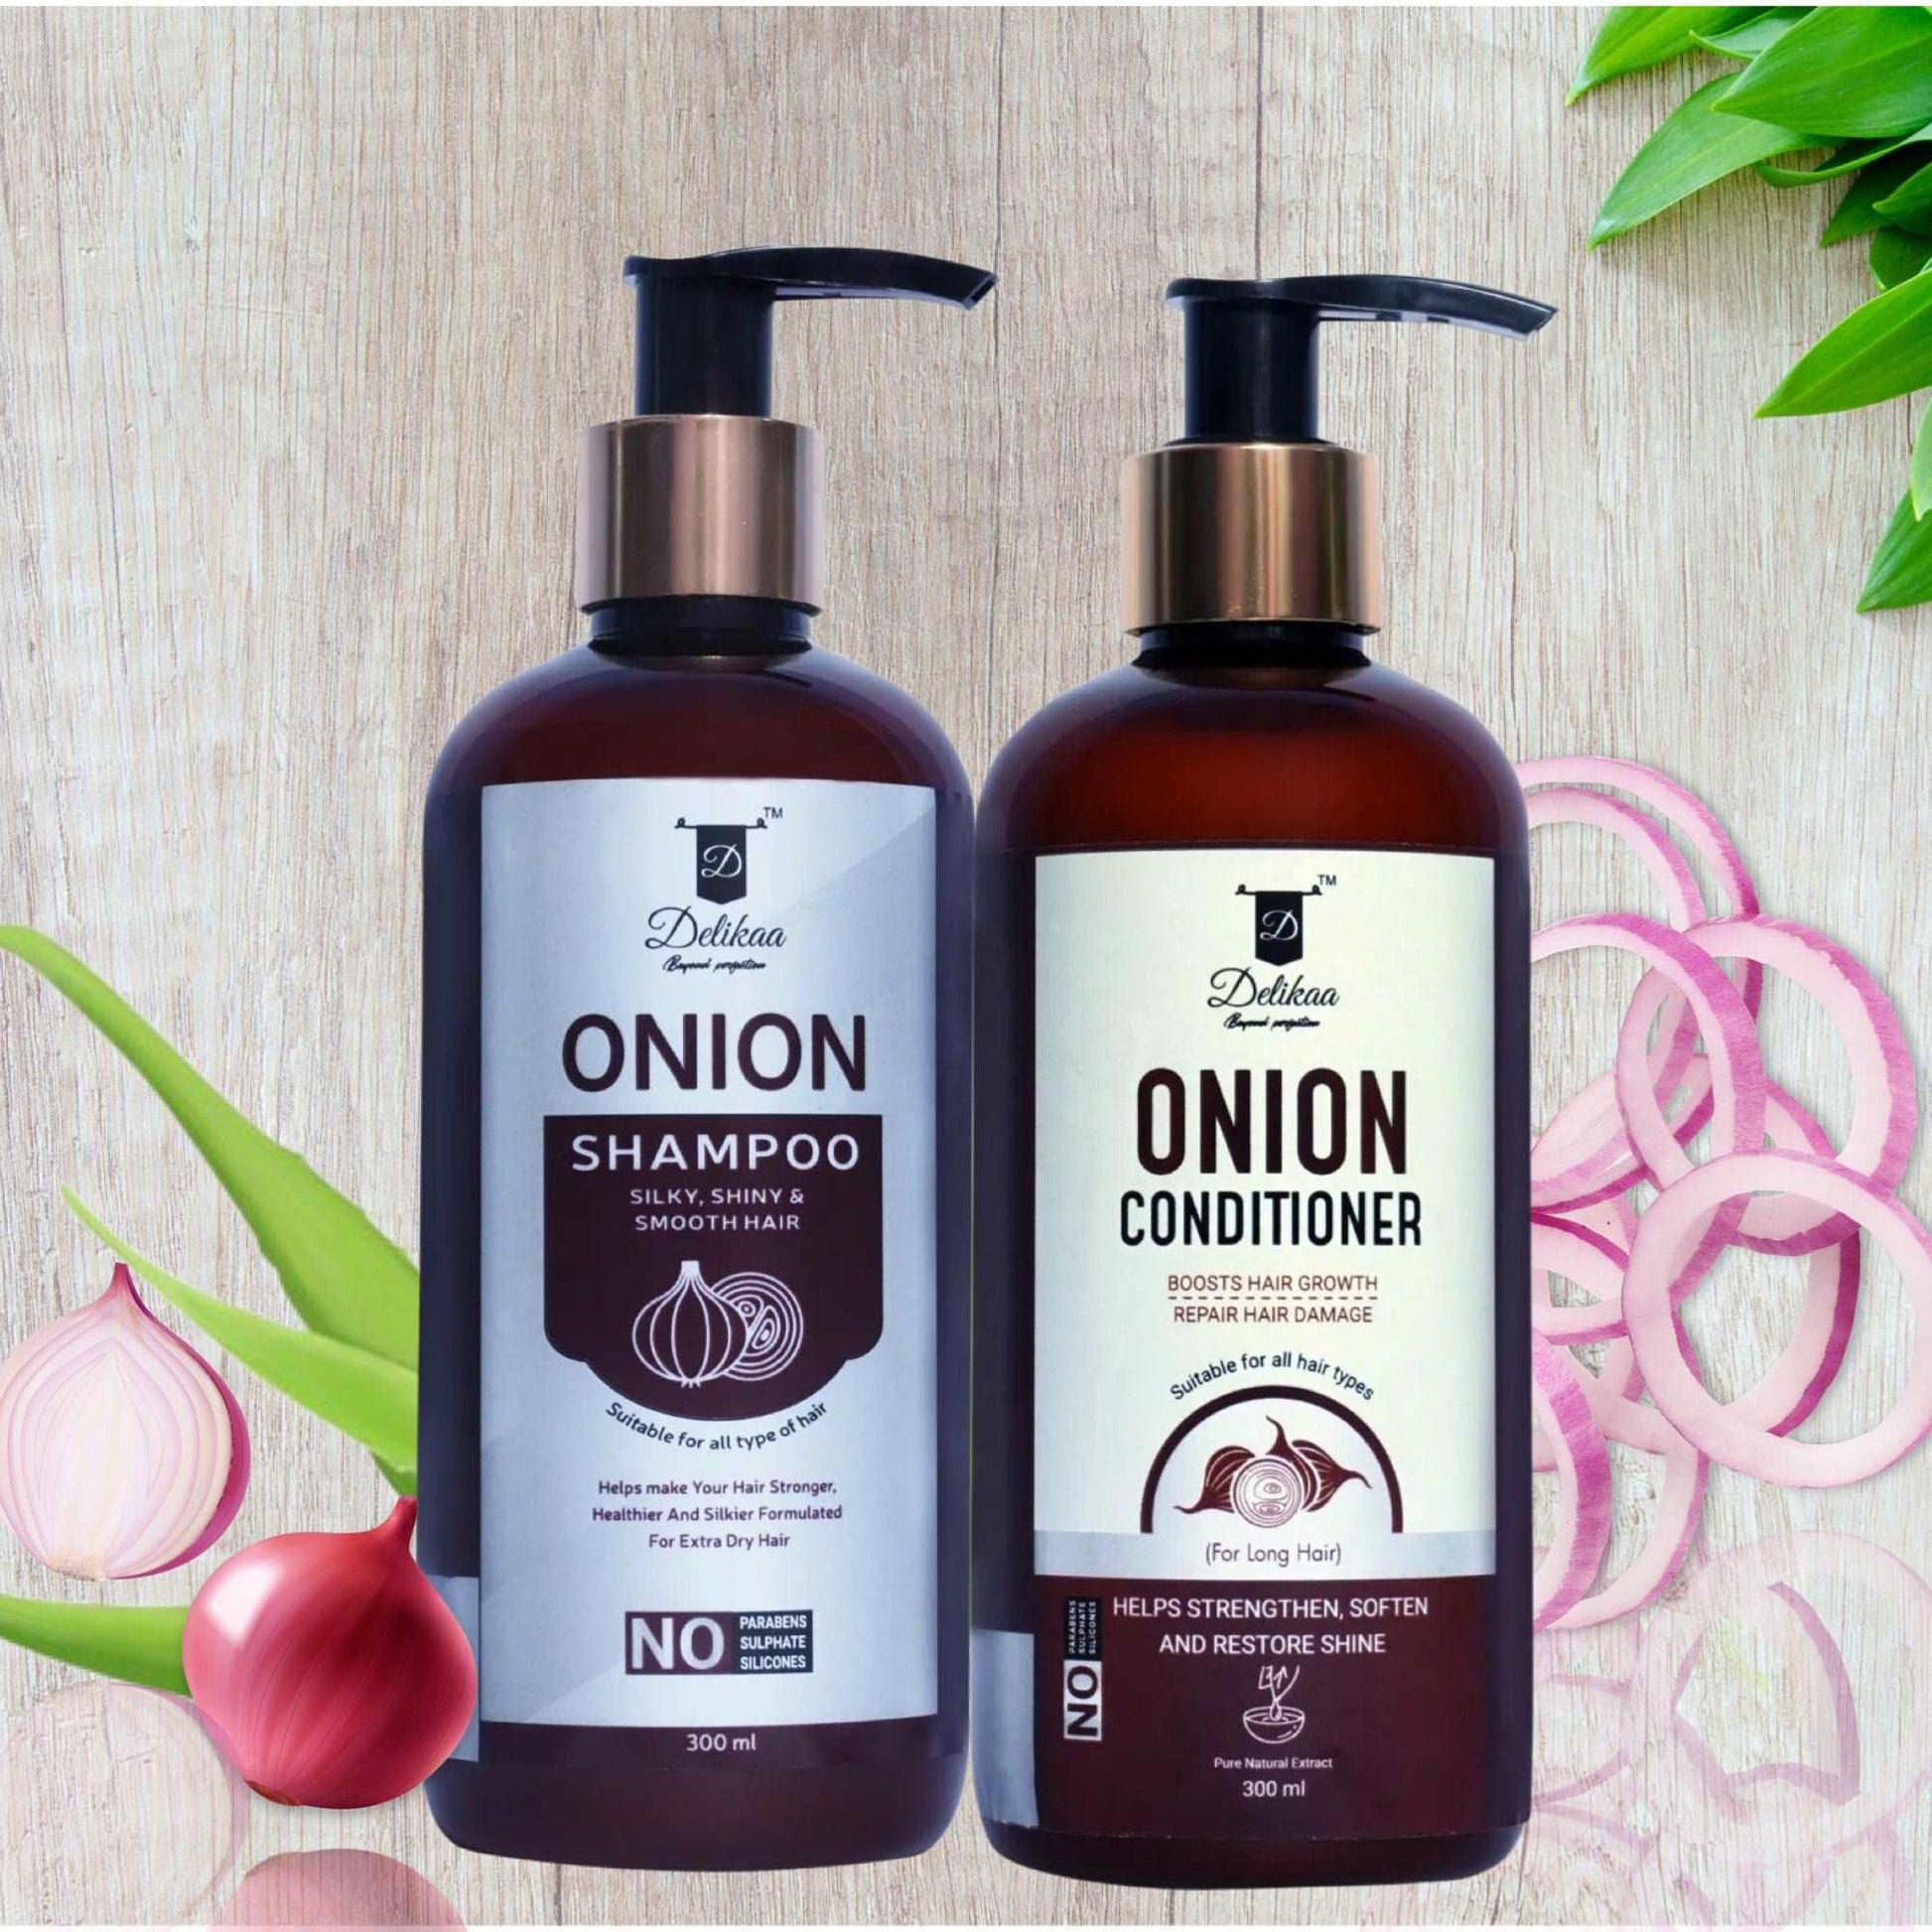 delikaa onion hair conditioner and onion shampoo combo for strong shiny and silky hair natural free from harmful chemicals & toxins. no parabens, sulphate,silicones,colors. it improves hair growth reduces hair fall makes hair strong 